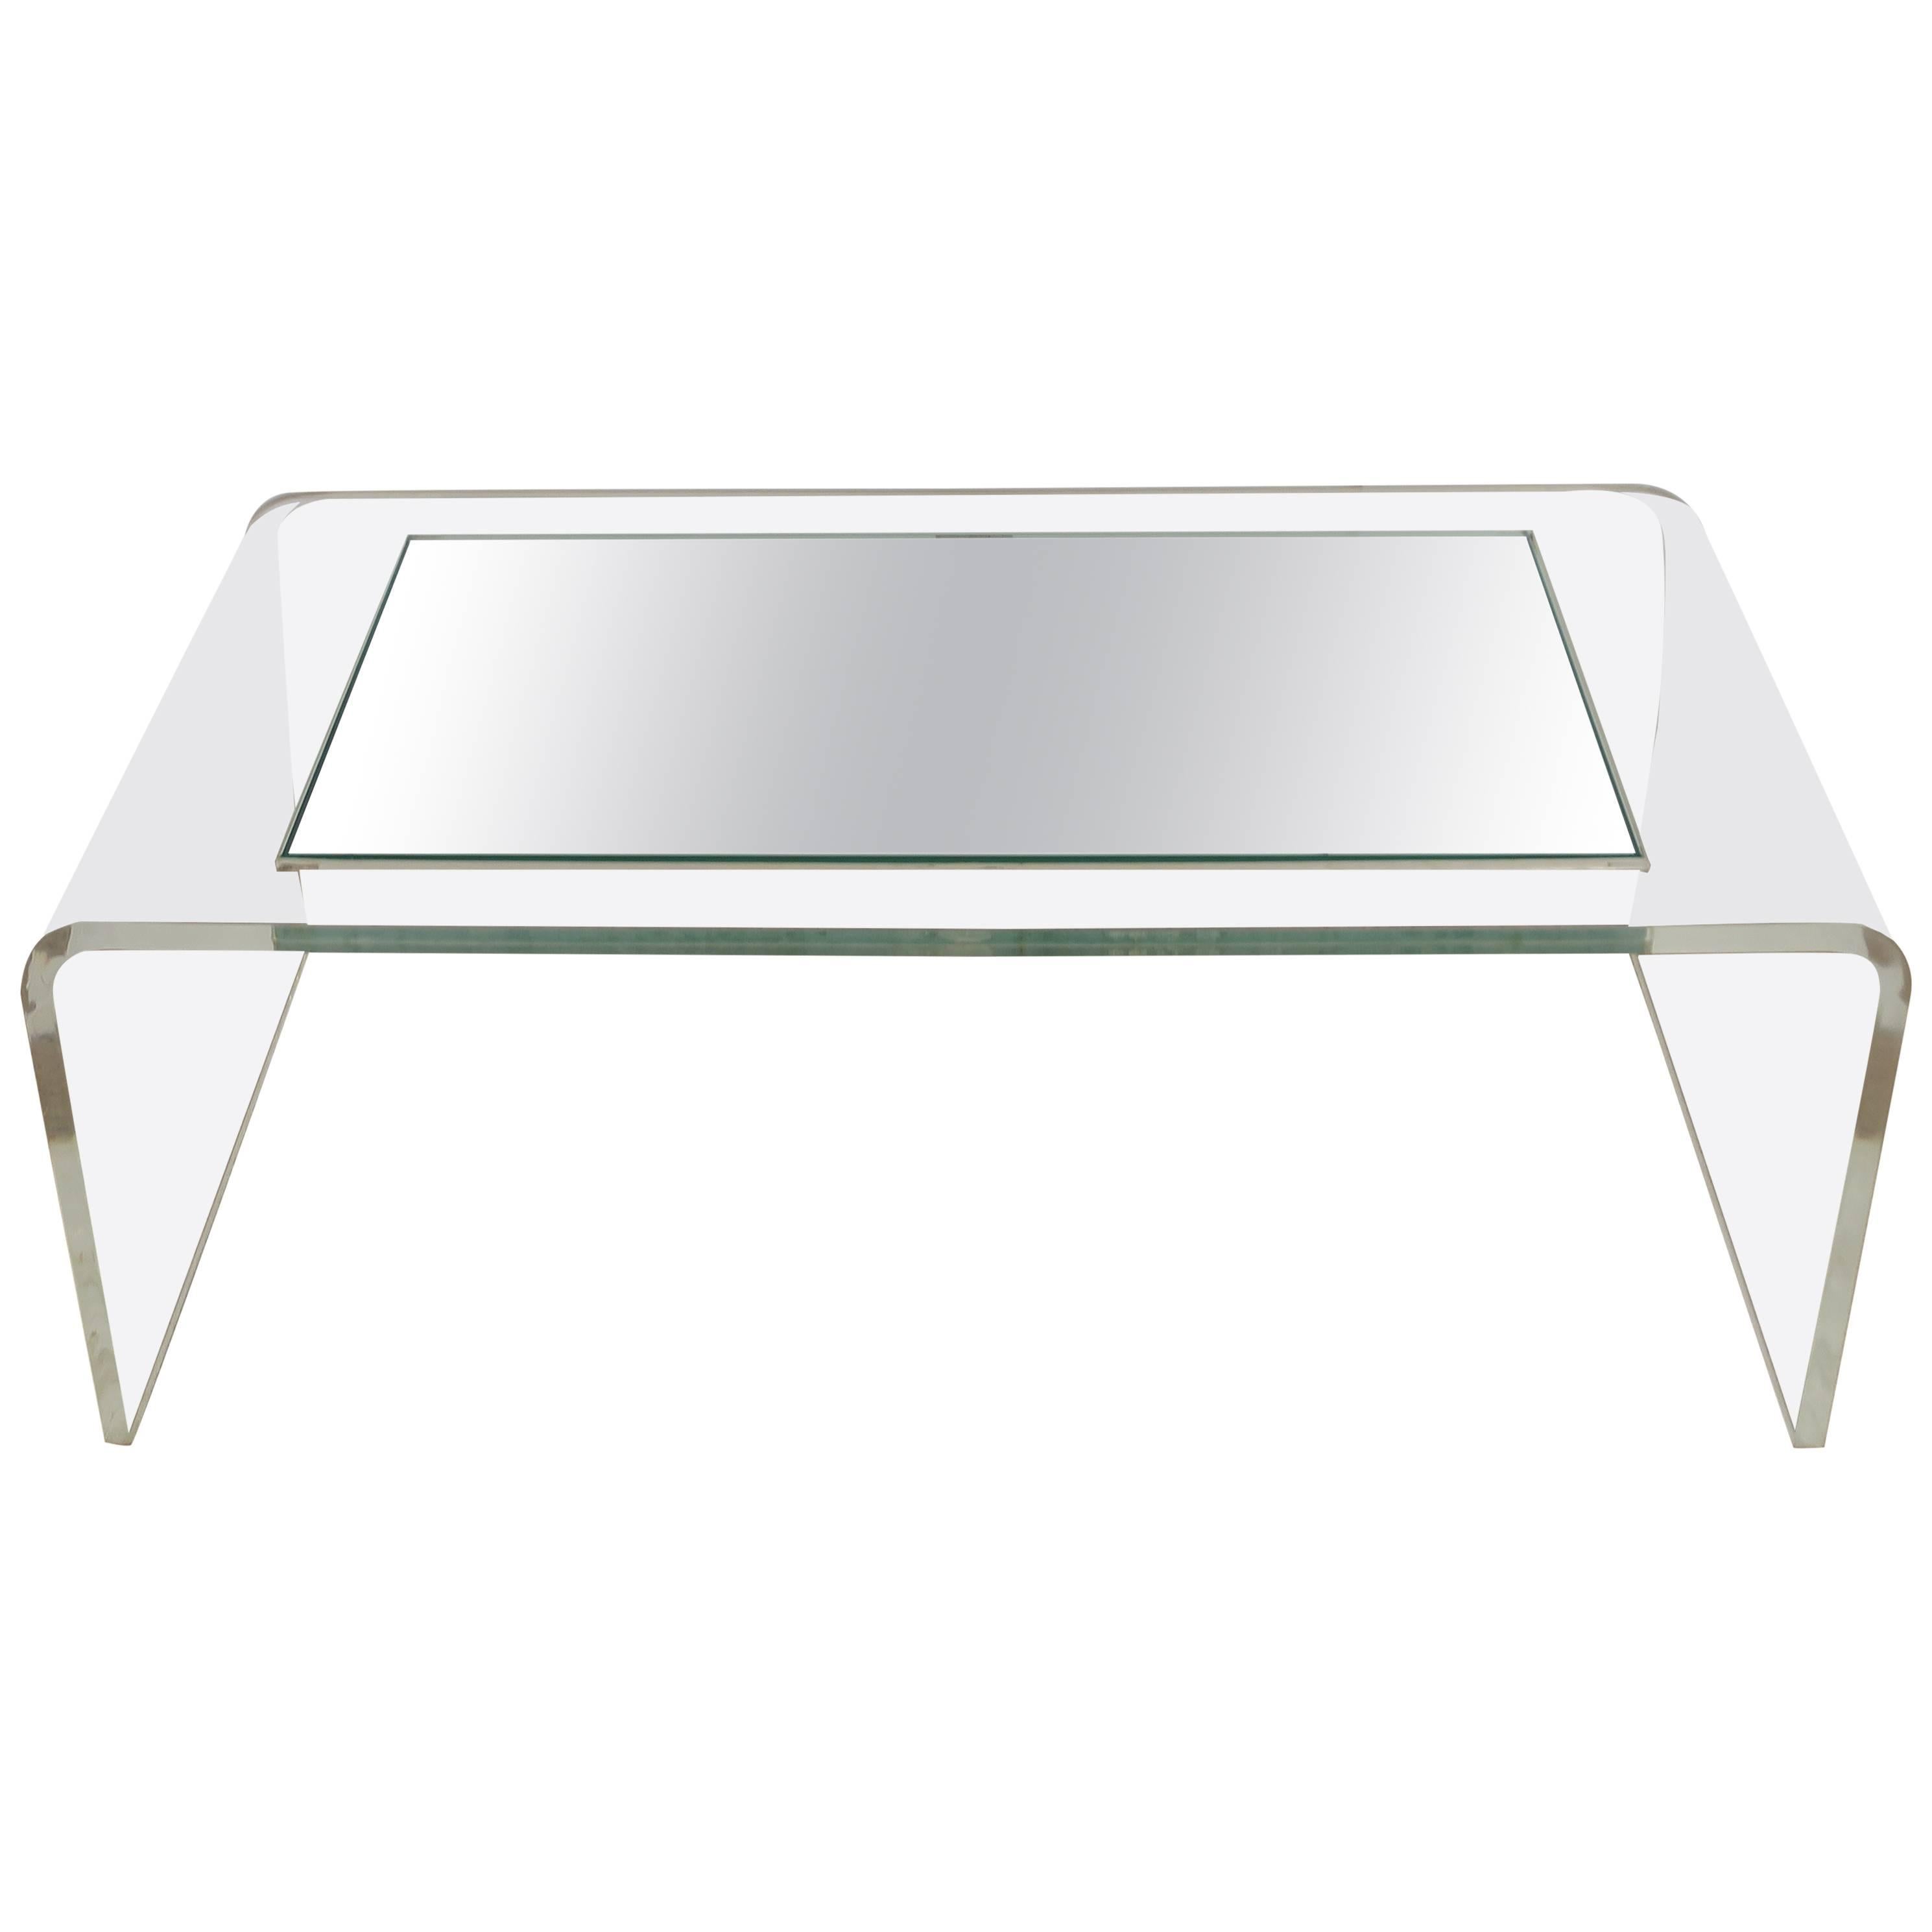 '70s Modern Lucite Waterfall Coffee Table 